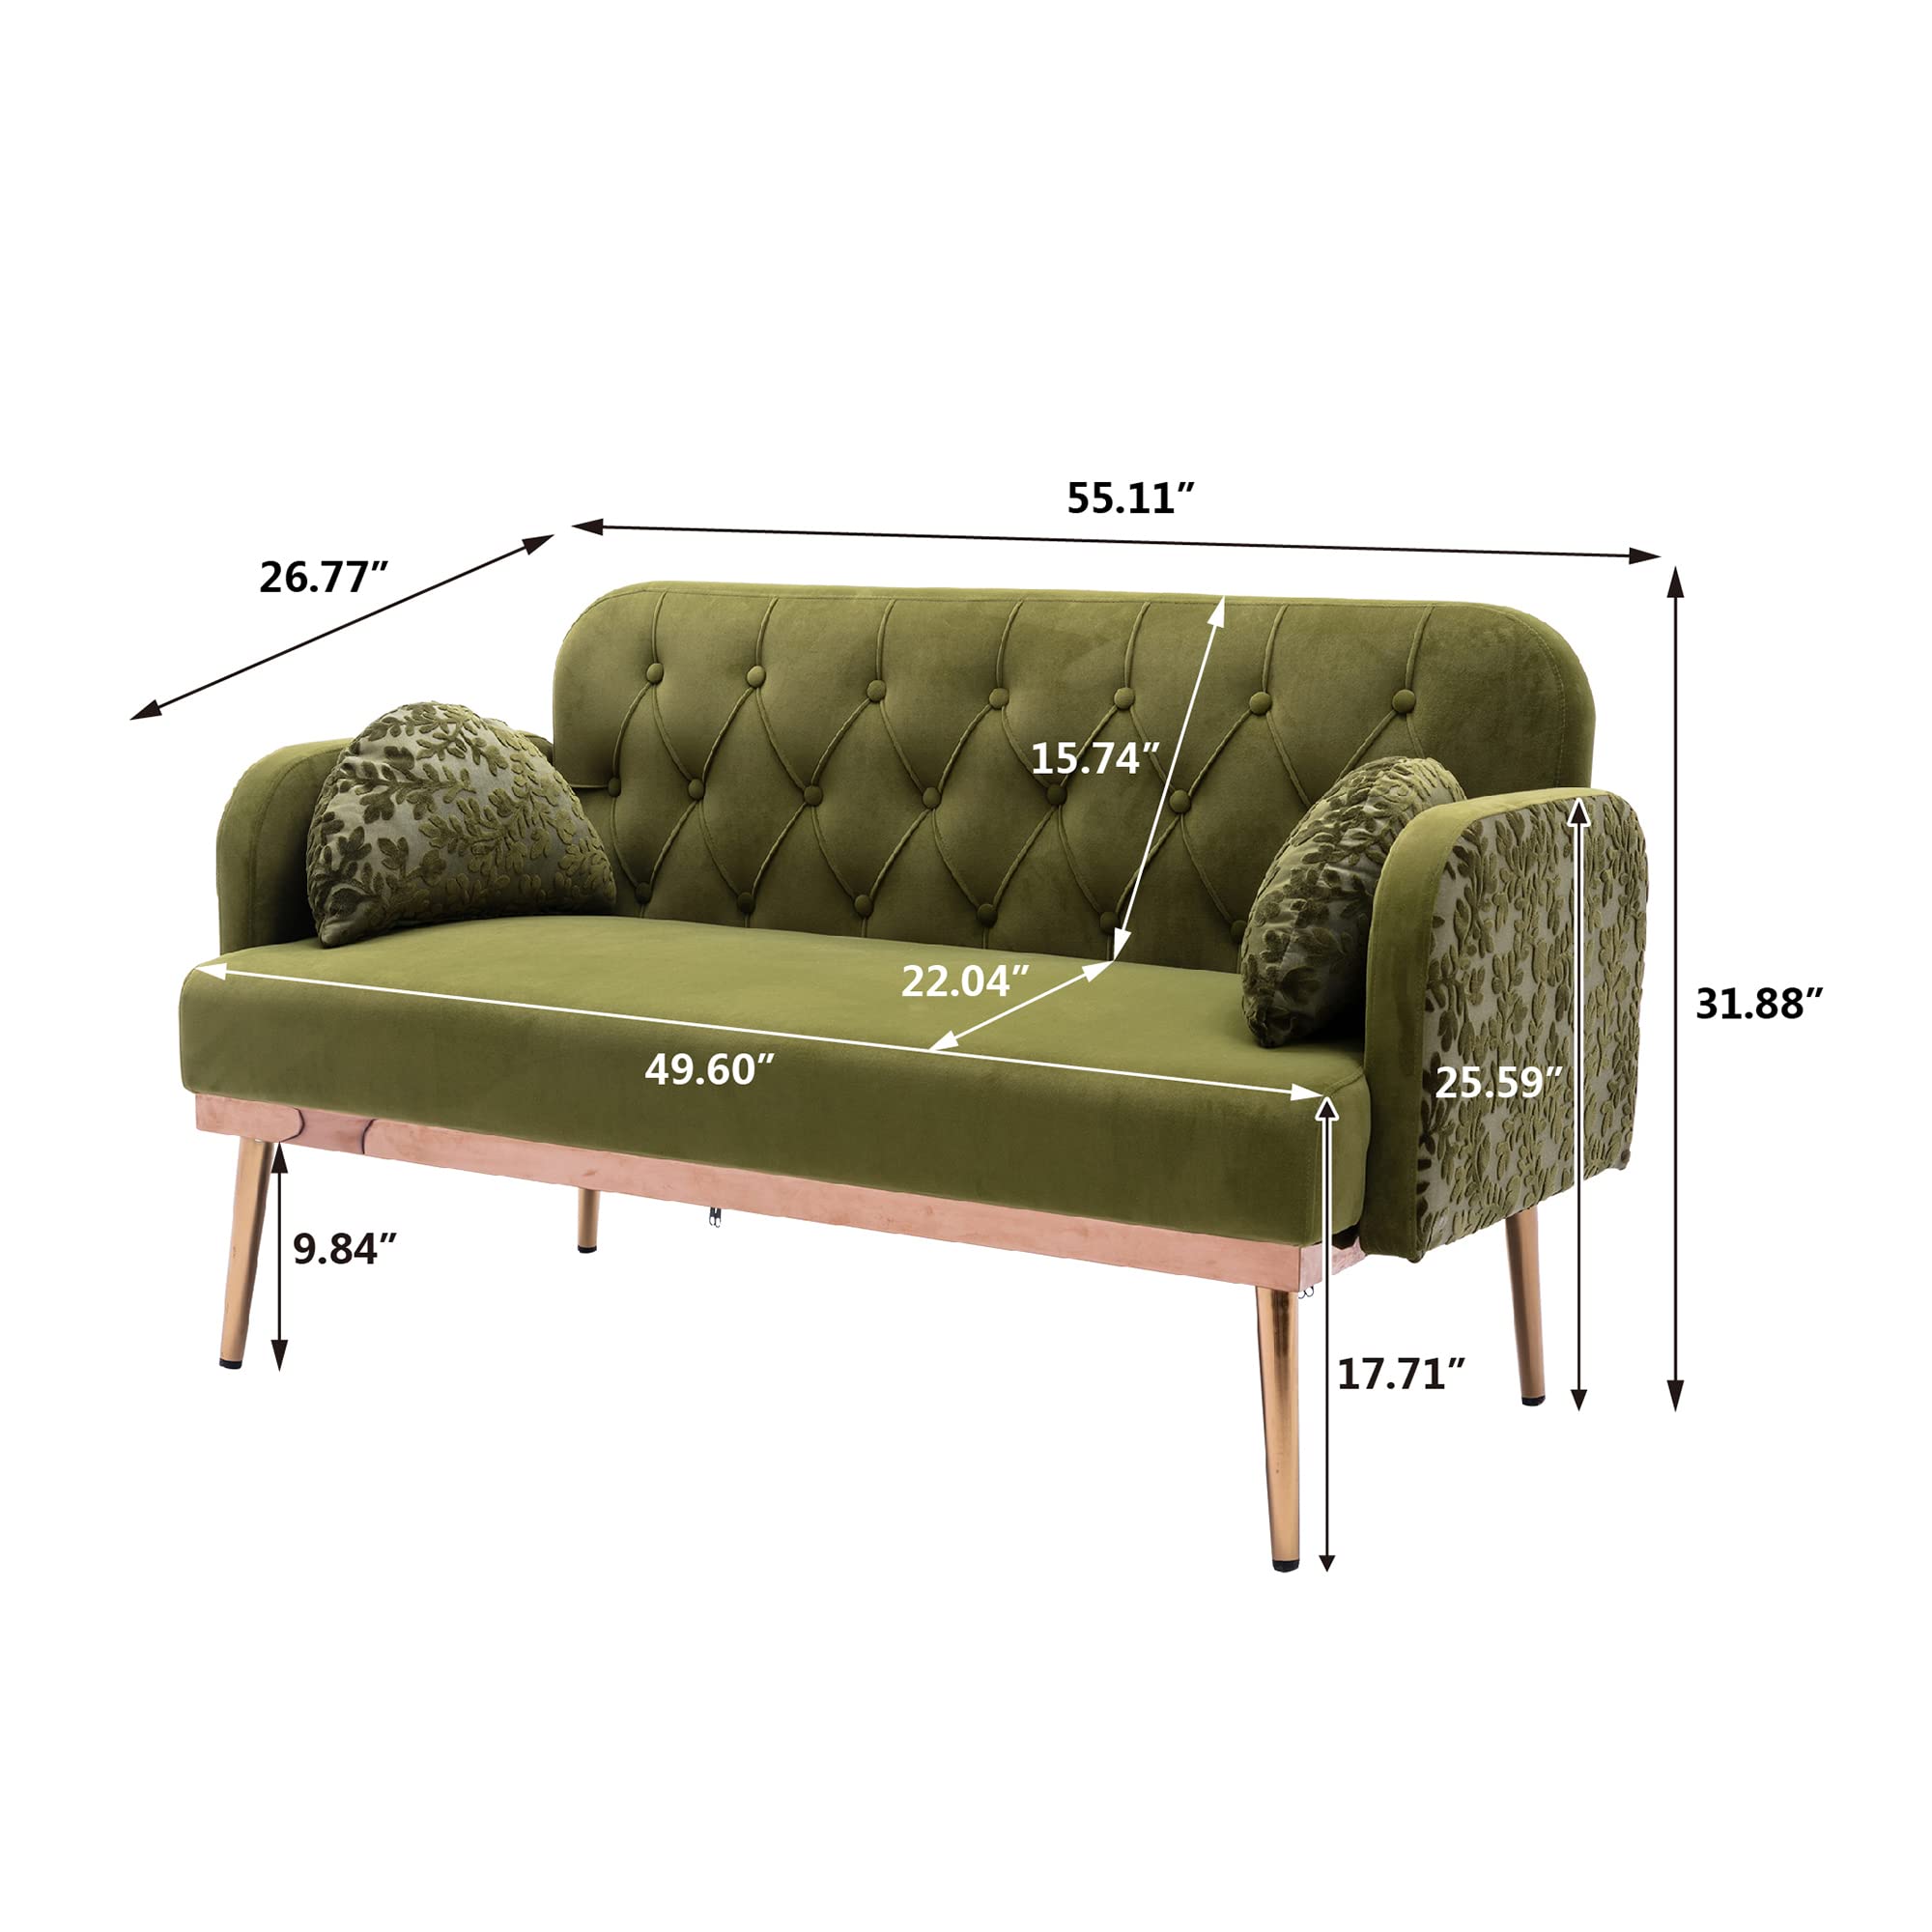 Anwickmak Twin Size Loveseat Accent Sofa Small Velvet Couch with Elegant Moon Shape 2 Pillows and Golden Metal Legs, for Living Room Bedroom Sofa with Tufted Backrest, (Green)